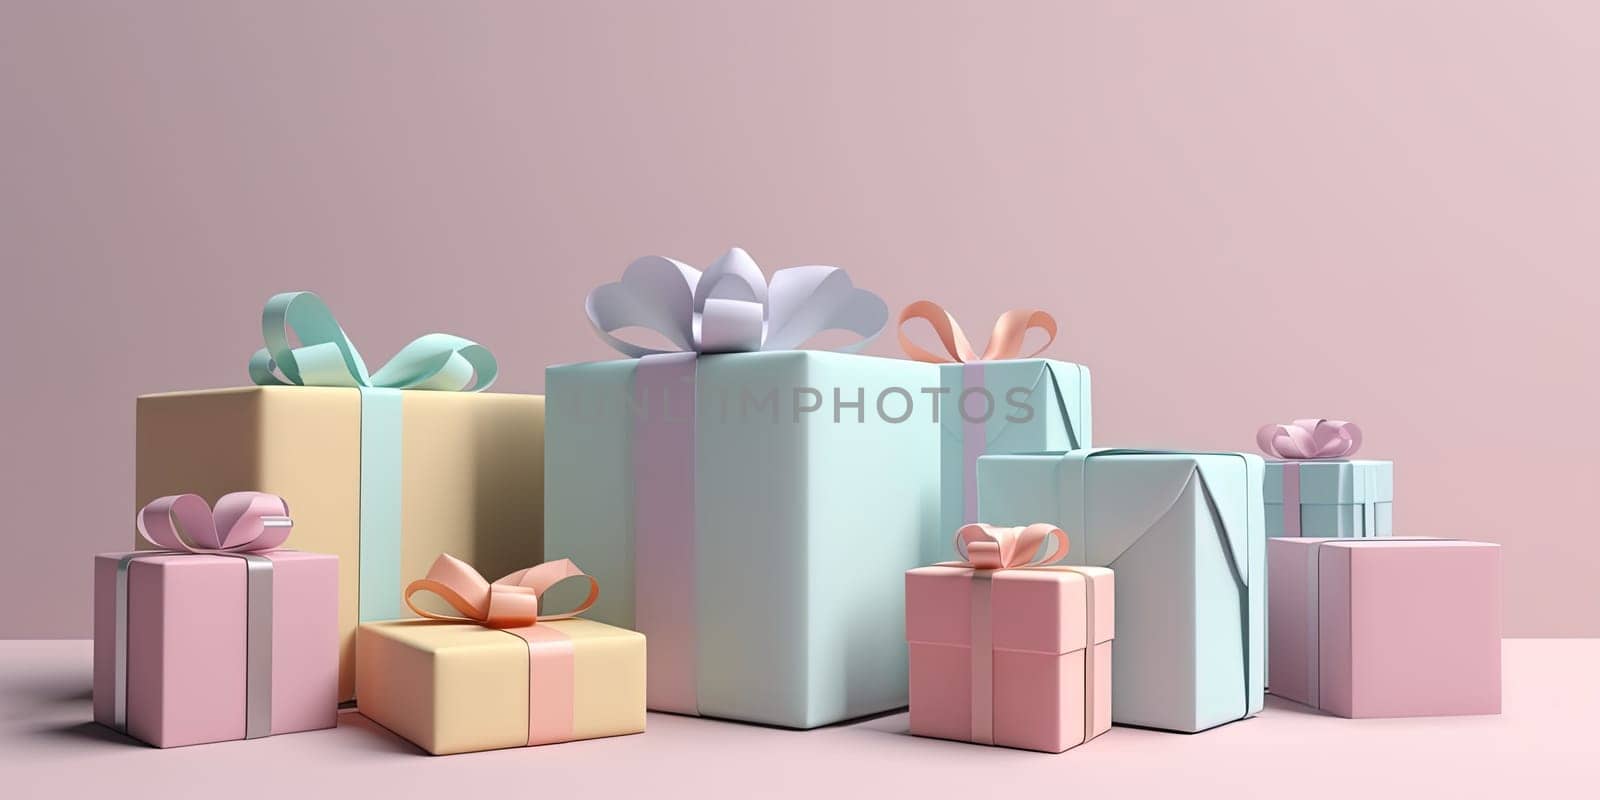 3D Illustration Gift Boxes With Bow In Pastel Colors , Concept Of Gifting For Holidays